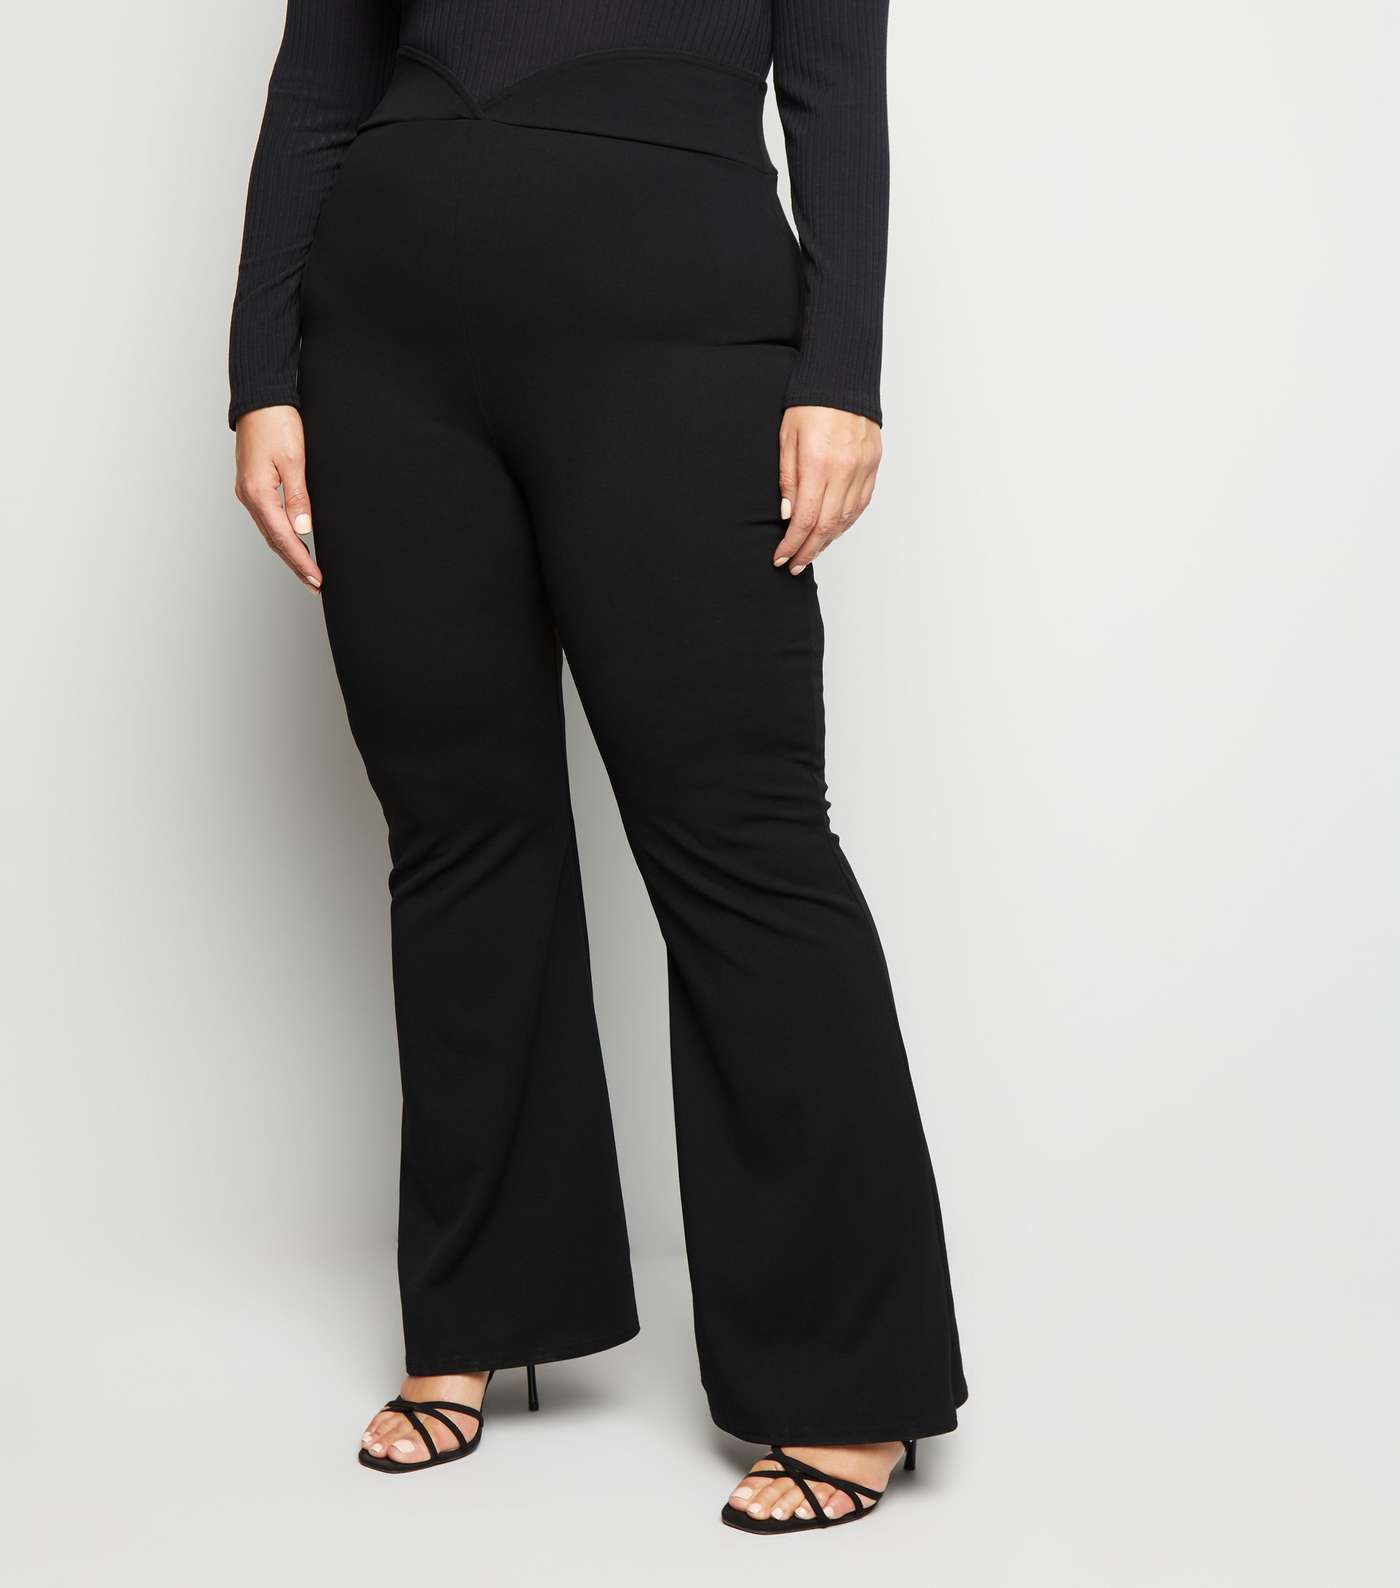 Just Curvy Black High Waist Flared Trousers Image 2